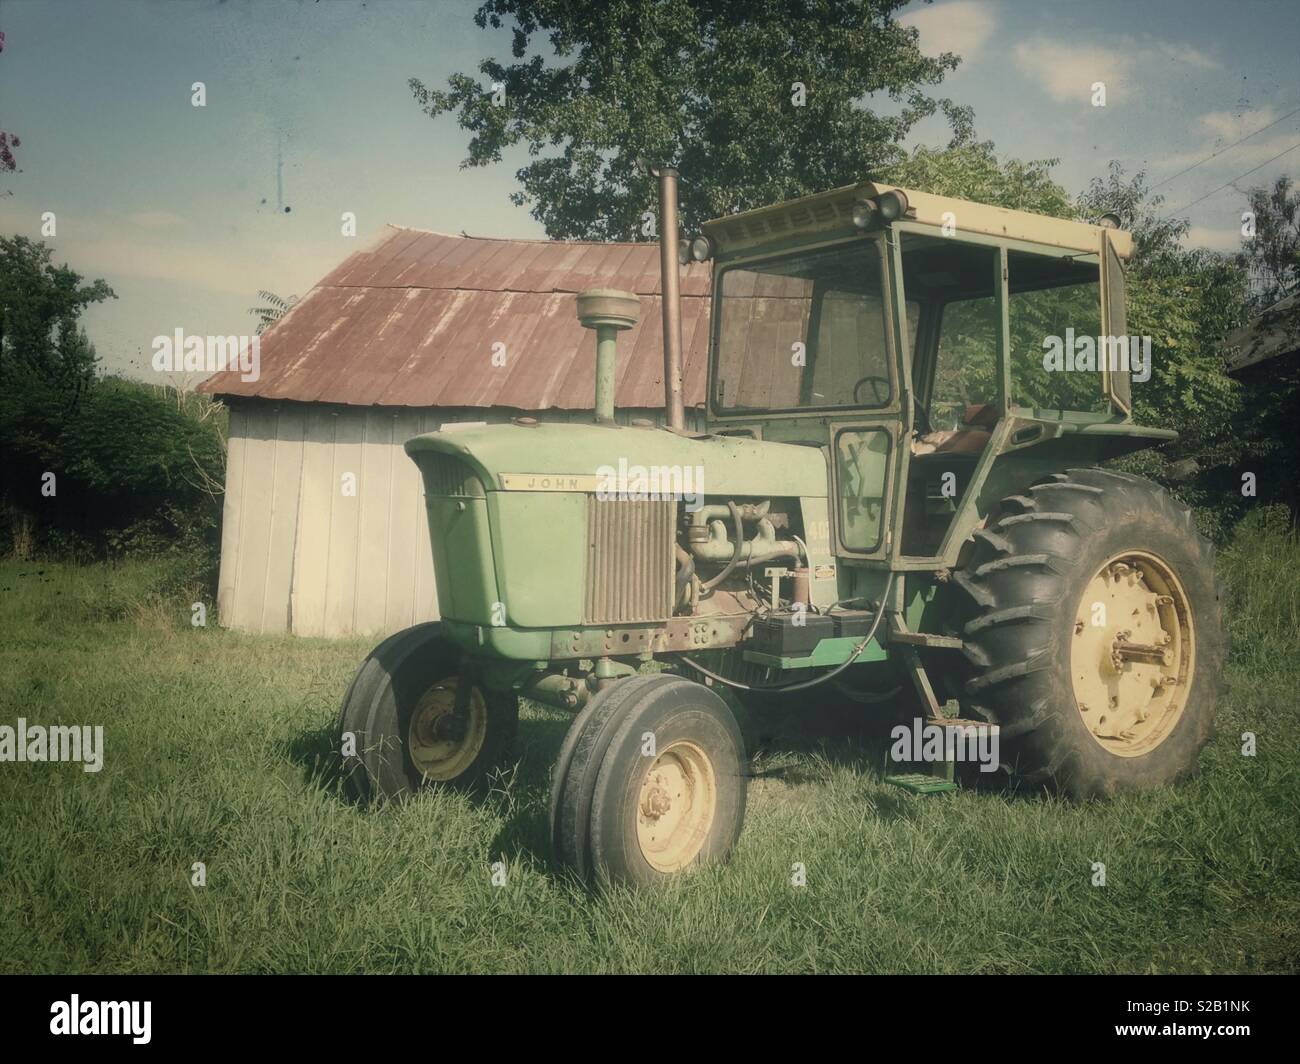 Vintage photo of old John Deere 4020 tractor with cab parked by rusted tin shed Stock Photo